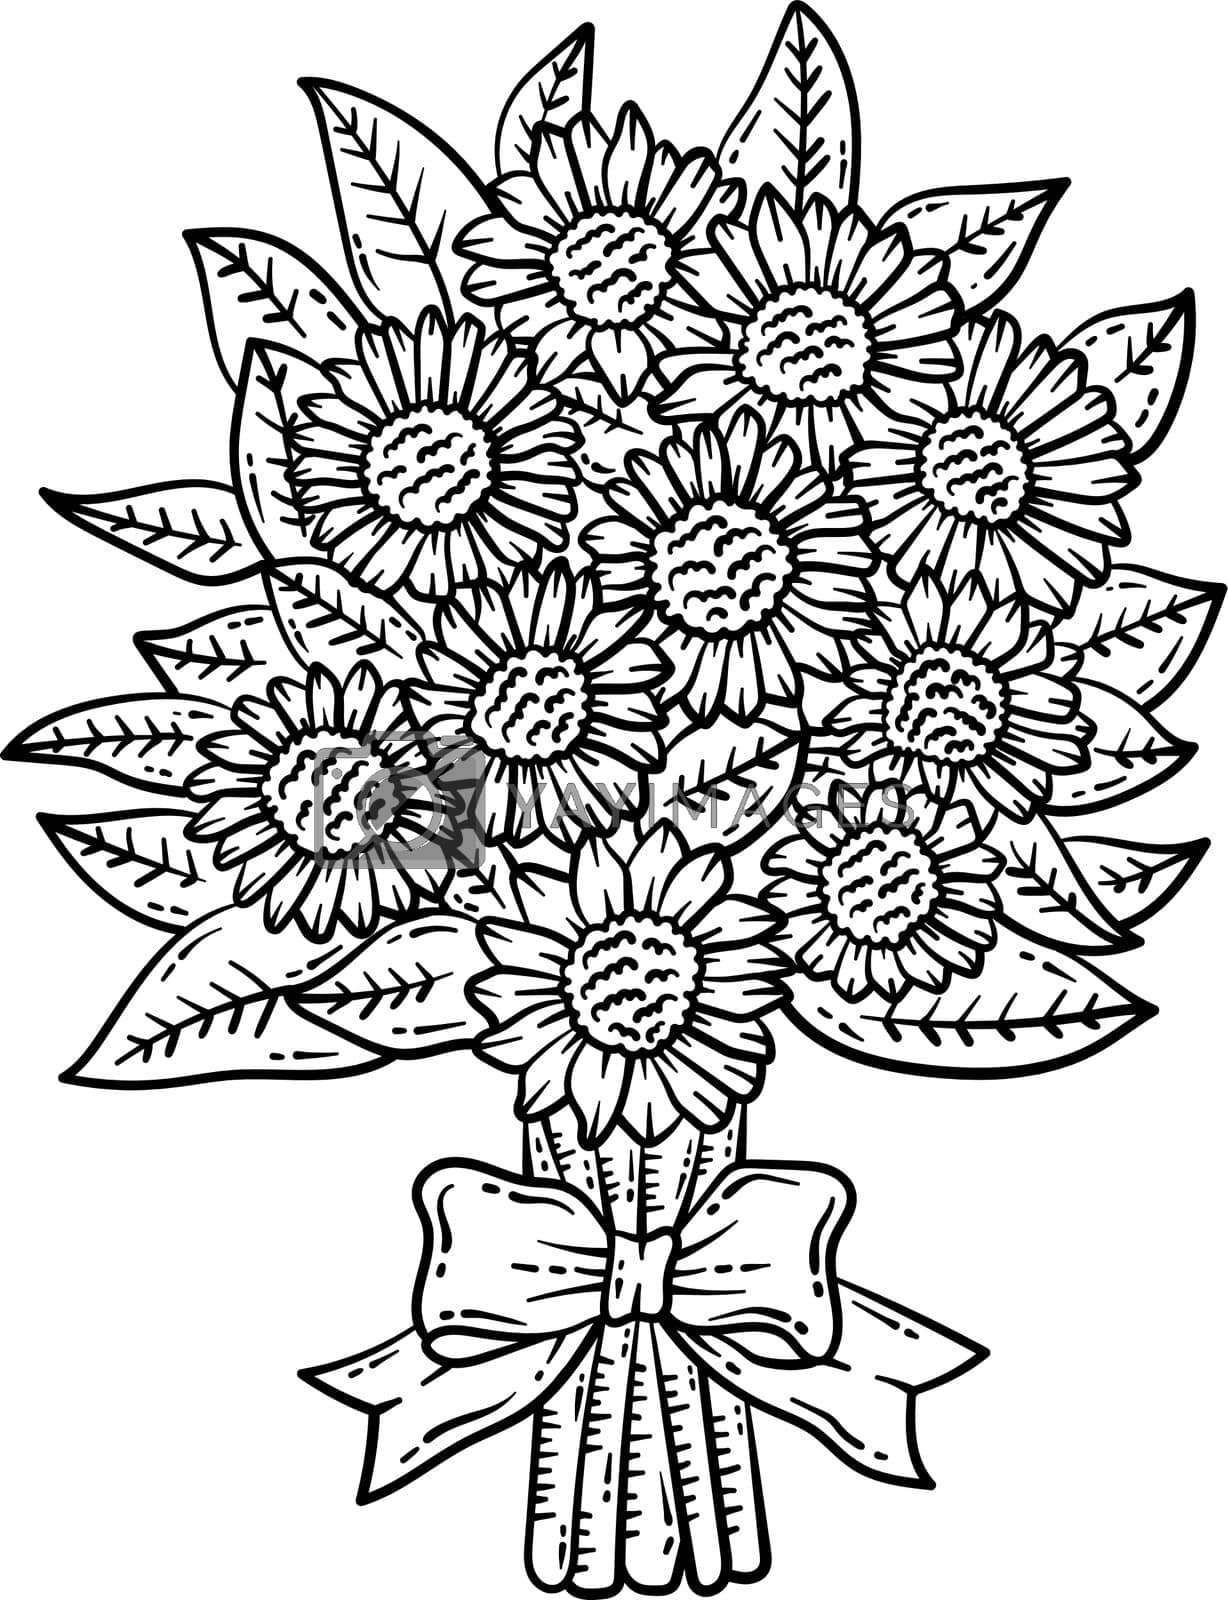 Royalty free image of Sunflower Bouquet Spring Coloring Page for Adults by abbydesign